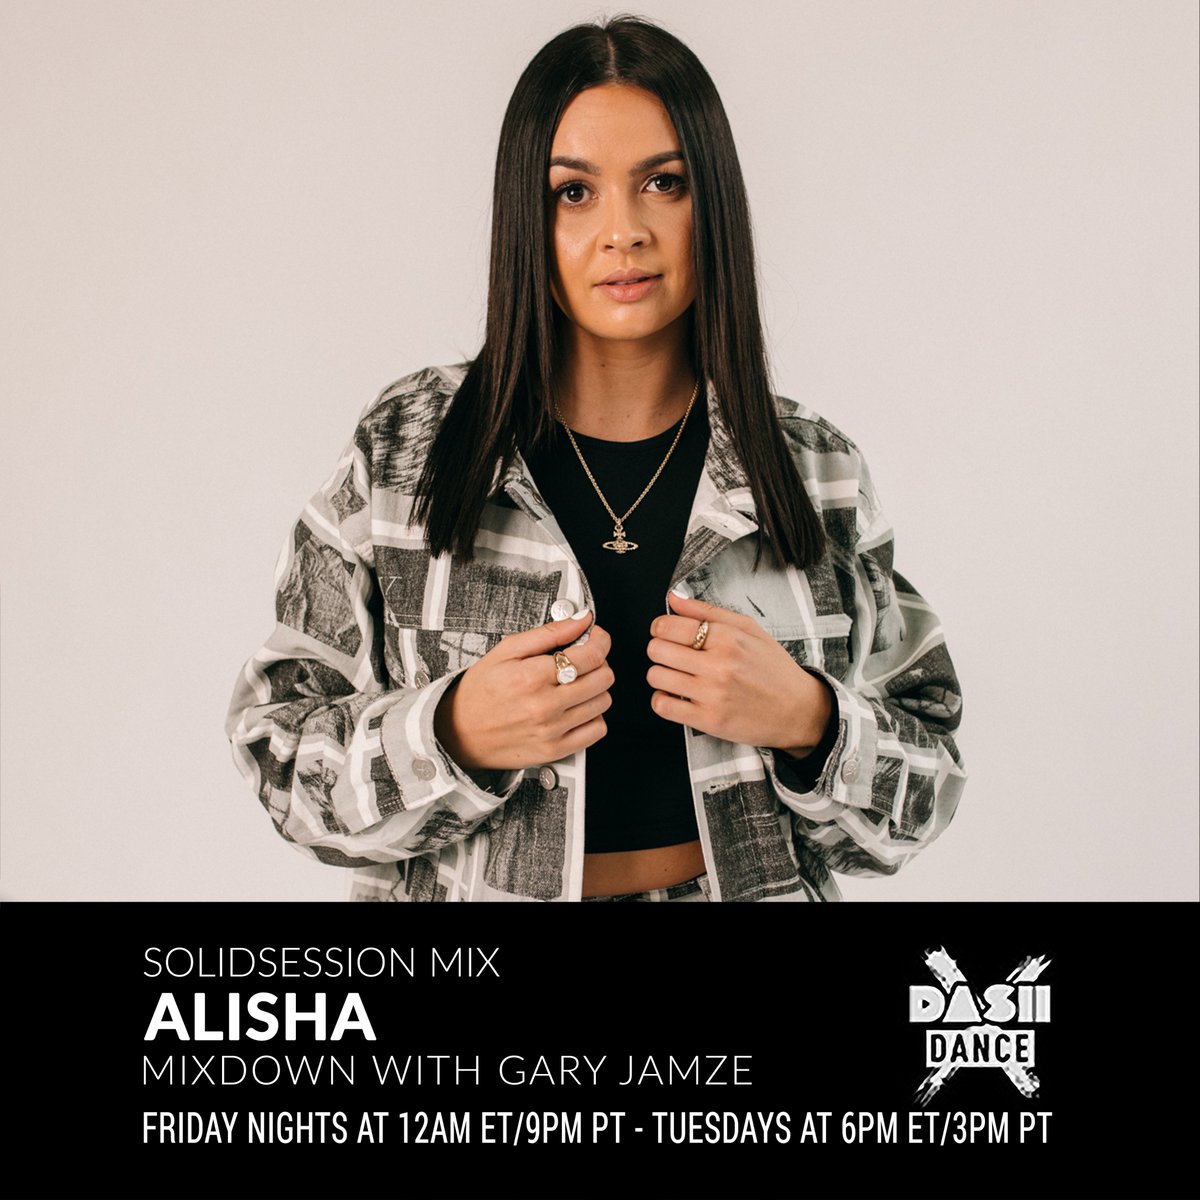 LISTEN! To @alisha__dj in the mix exclusively for @garyjamze on Mixdown on @dash_radio 

mixcloud.com/garyjamze/mixd…

Grab her 'Changes' EP on @Hot_Creations  now!
lnk.to/HOTC209